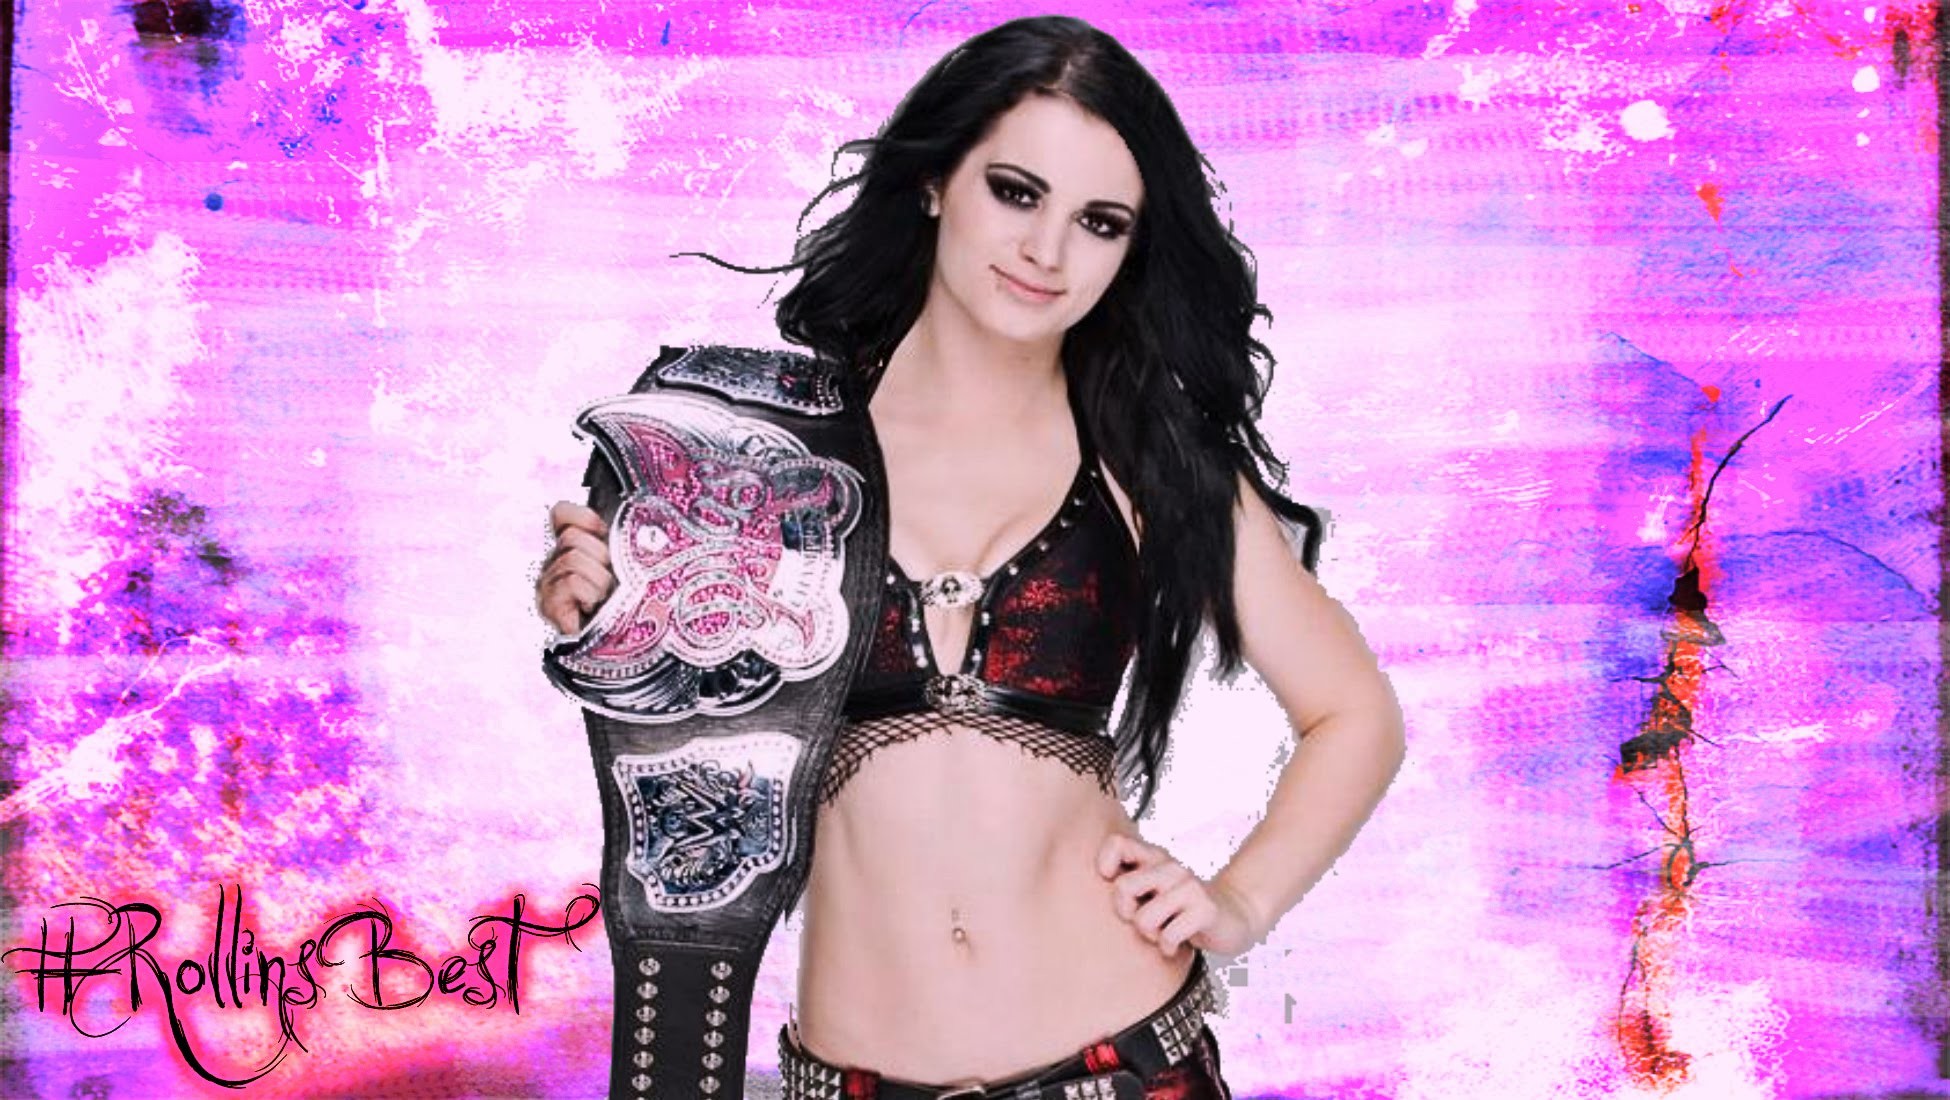 1950x1100 Paige HD Pictures